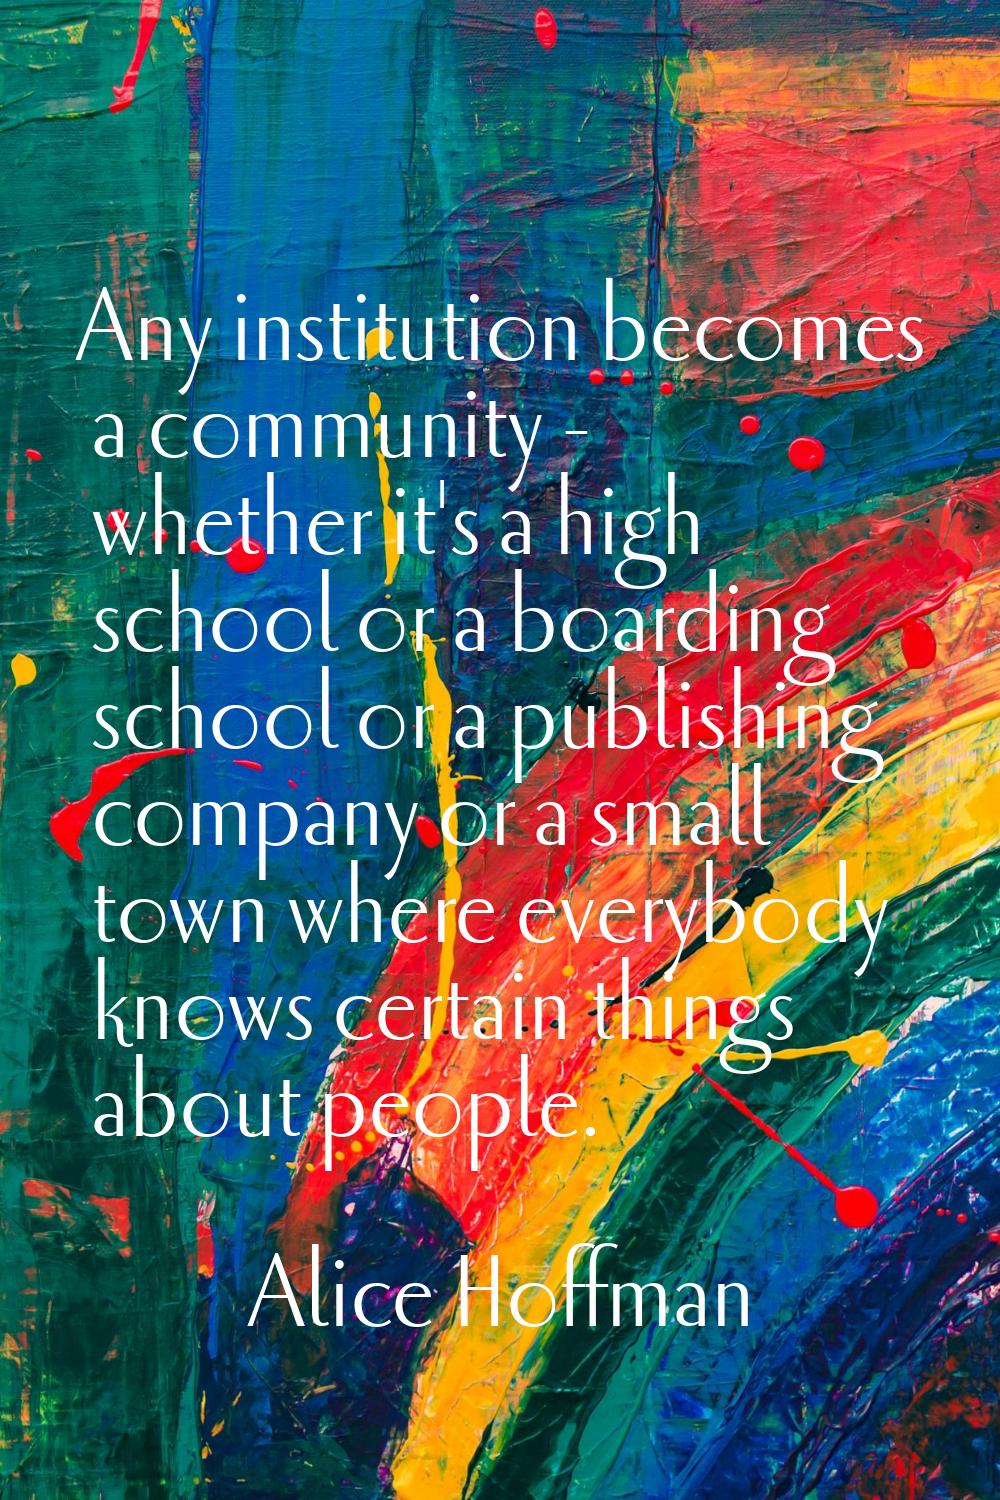 Any institution becomes a community - whether it's a high school or a boarding school or a publishi